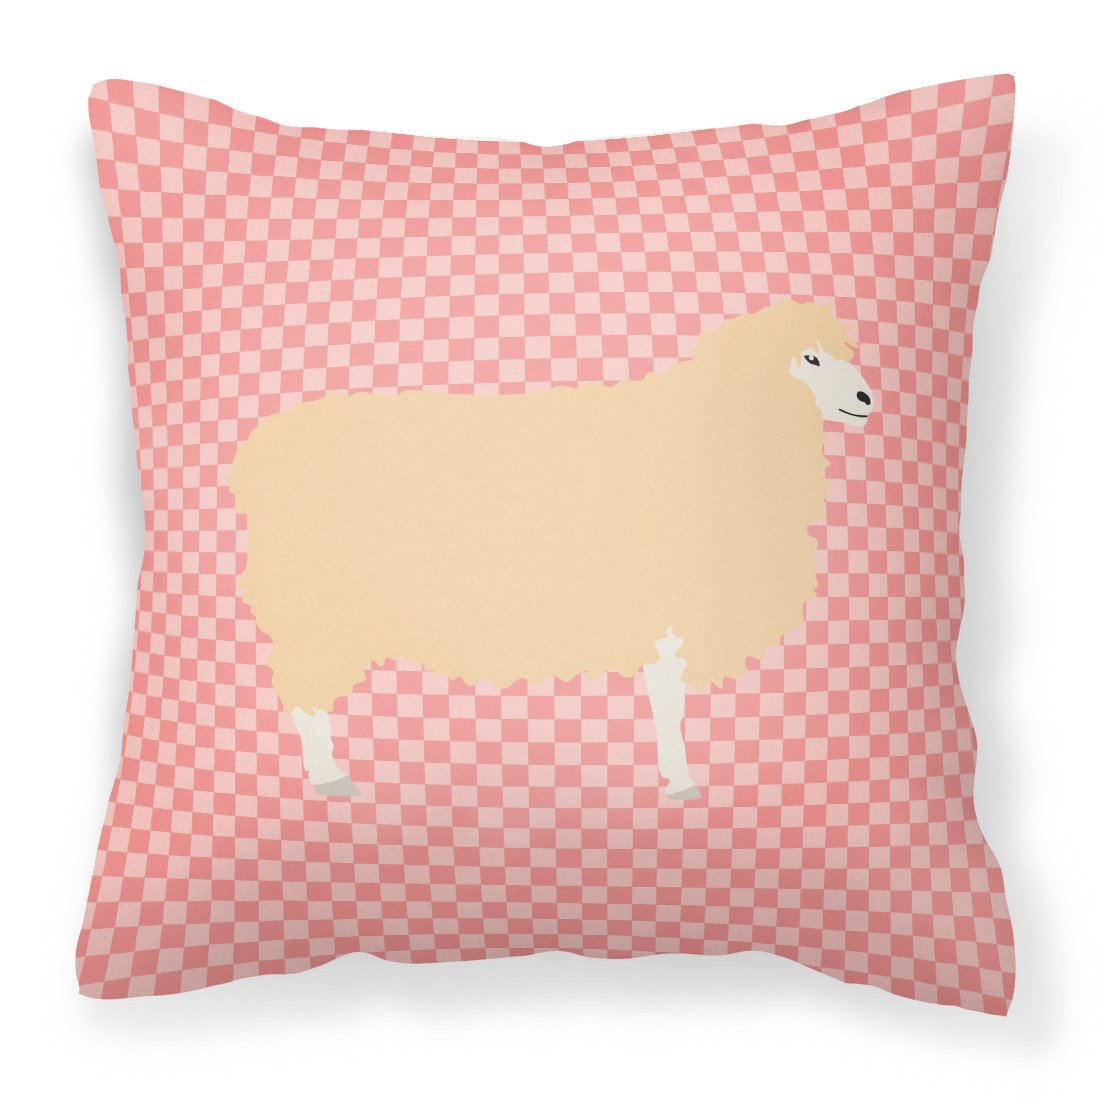 English Leicester Longwool Sheep Pink Check Fabric Decorative Pillow BB7974PW1818 by Caroline's Treasures